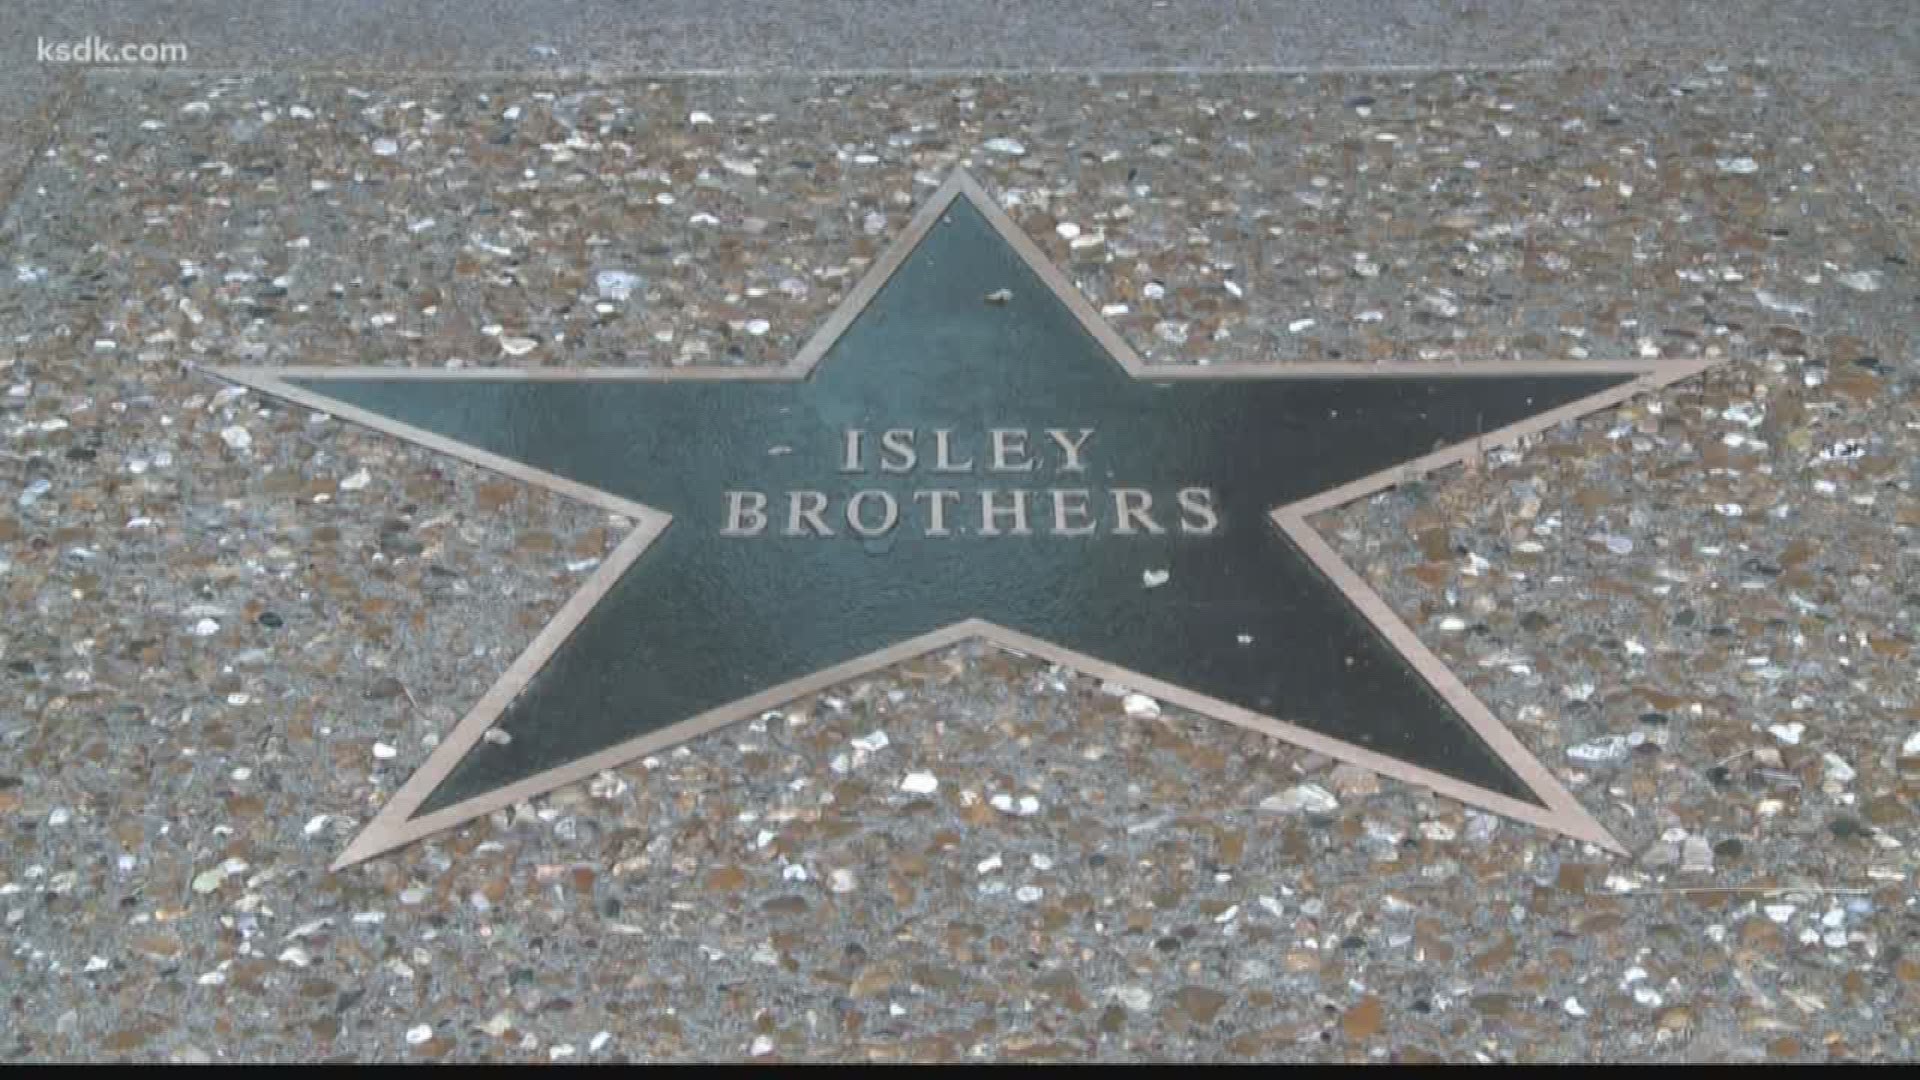 The legendary band is now part of the St. Louis Walk of Fame.